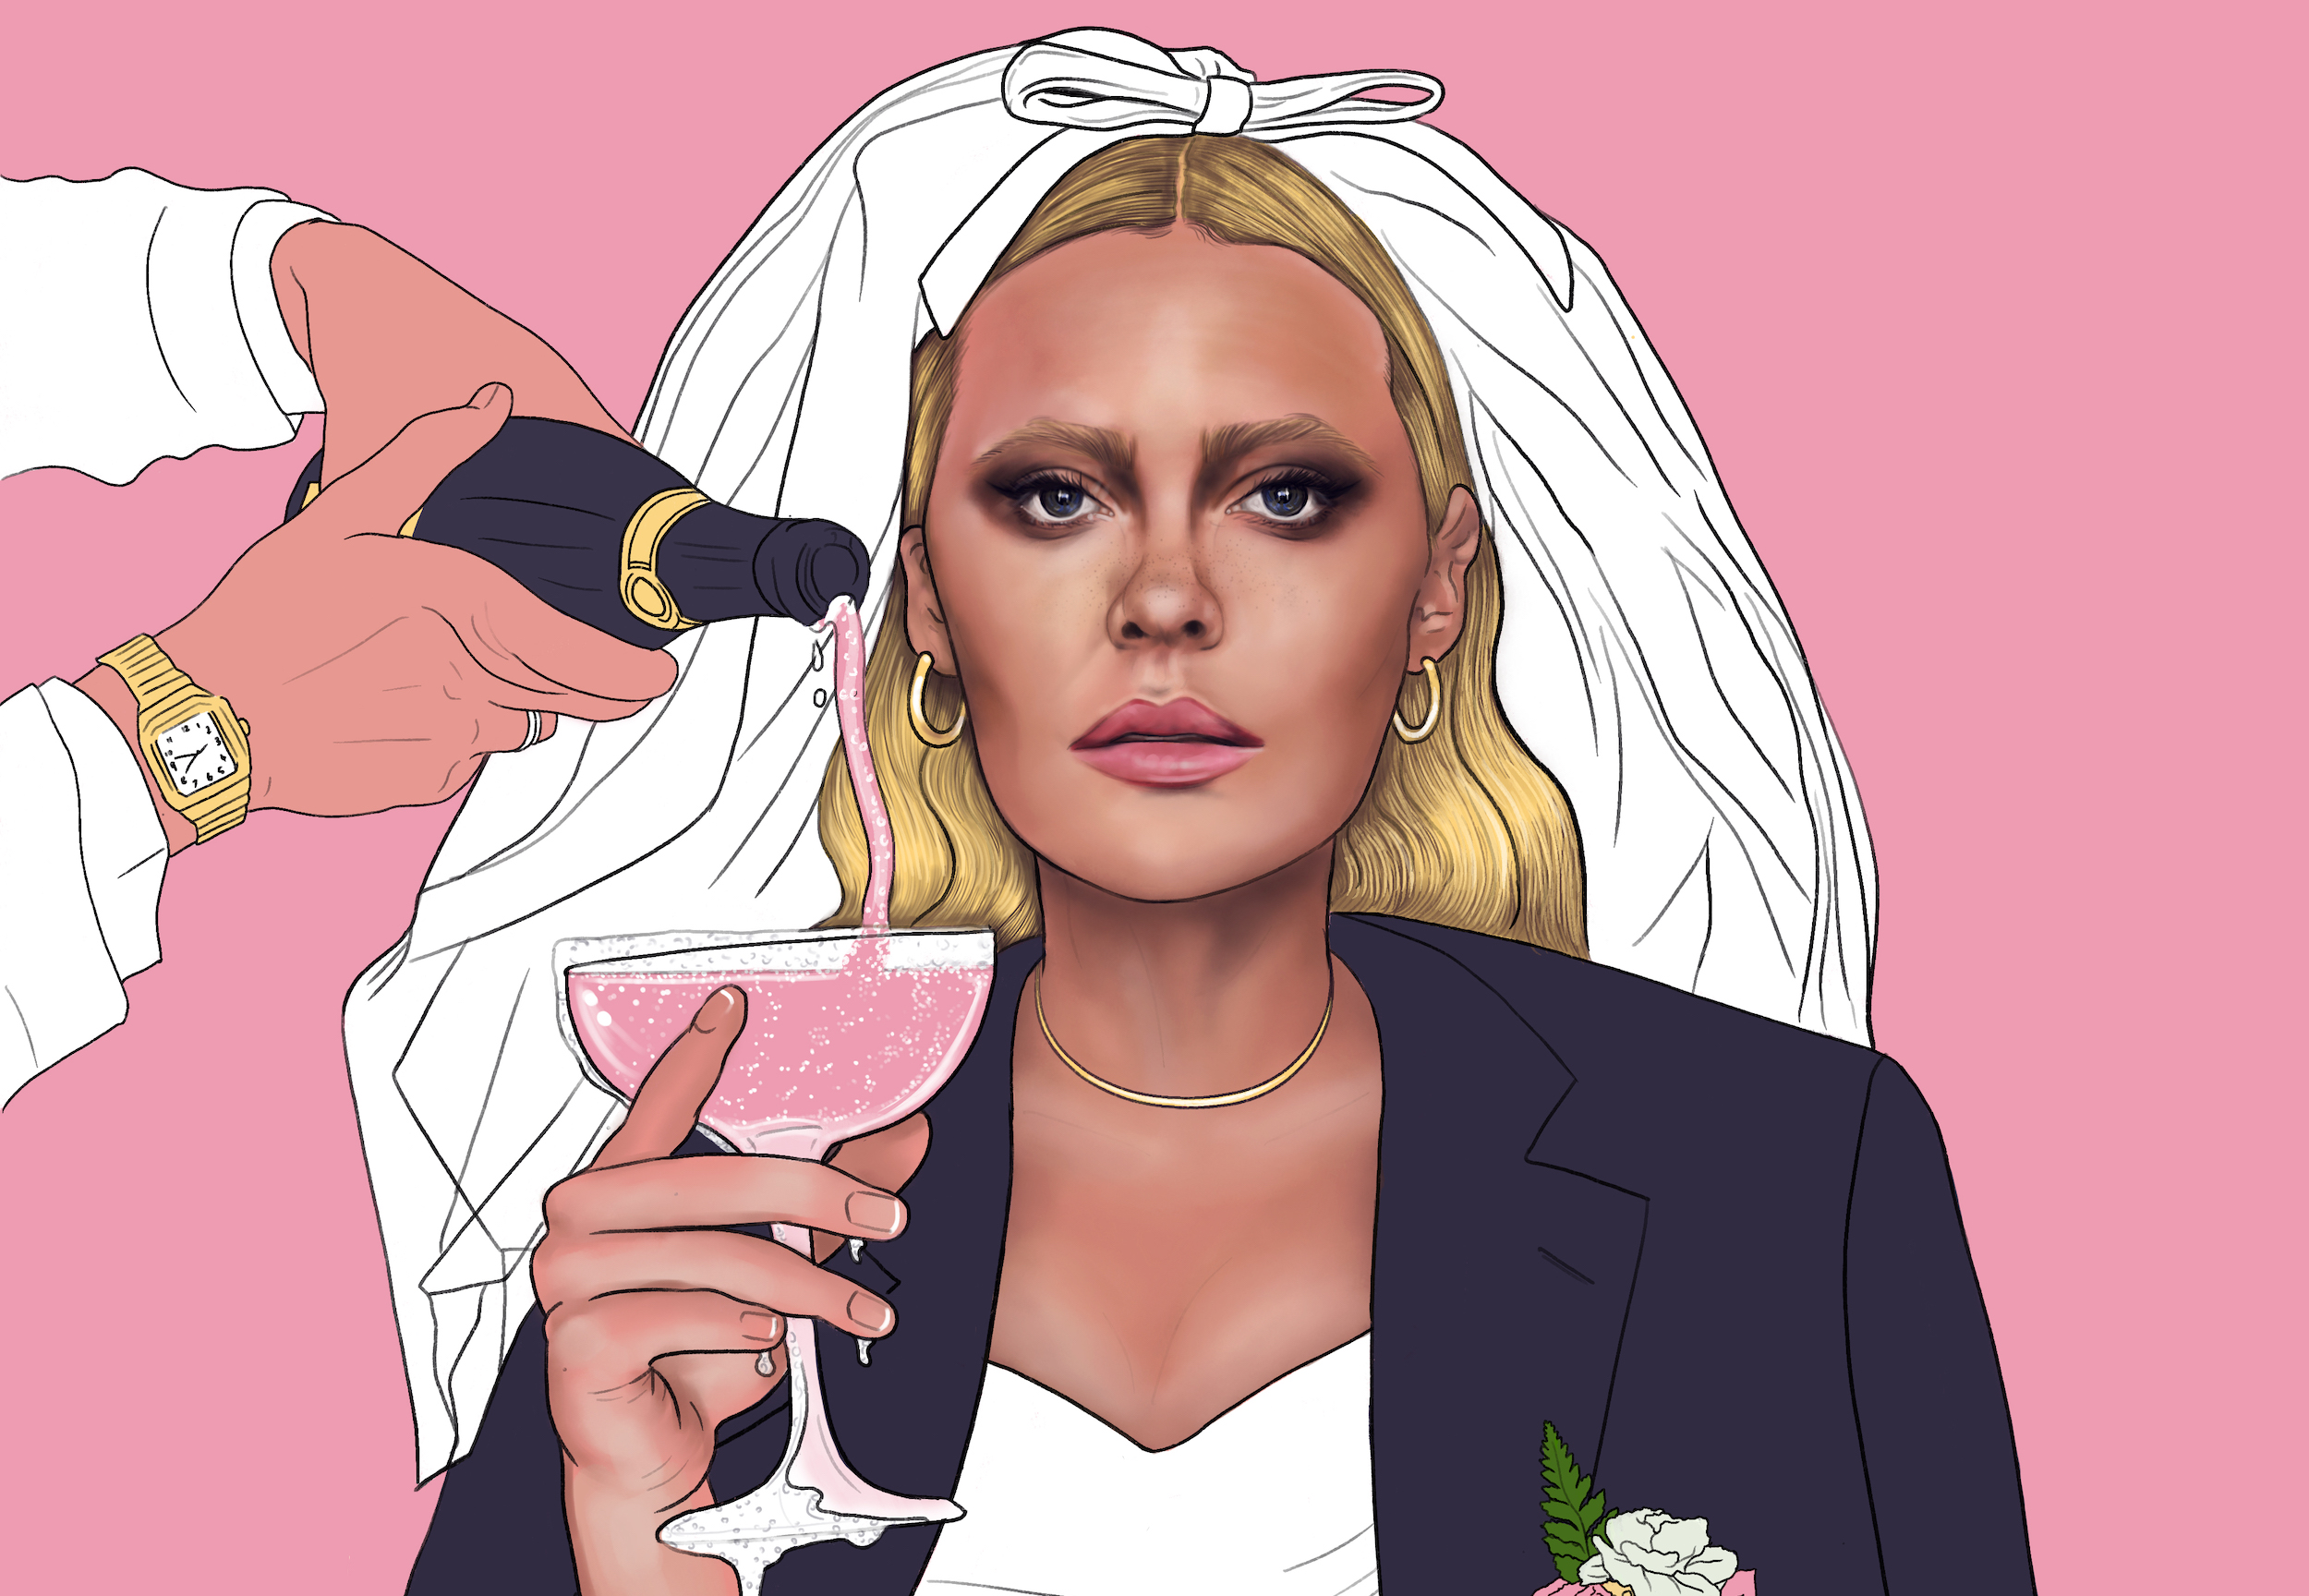 Illustration of a white bride with blonde hair, in a white veil and dark smuged eye make-up. She is holding a glass while male hands pour champagne into the glasses, which is overflowing. The bride is also wearing a navy blue man's wedding jacket.